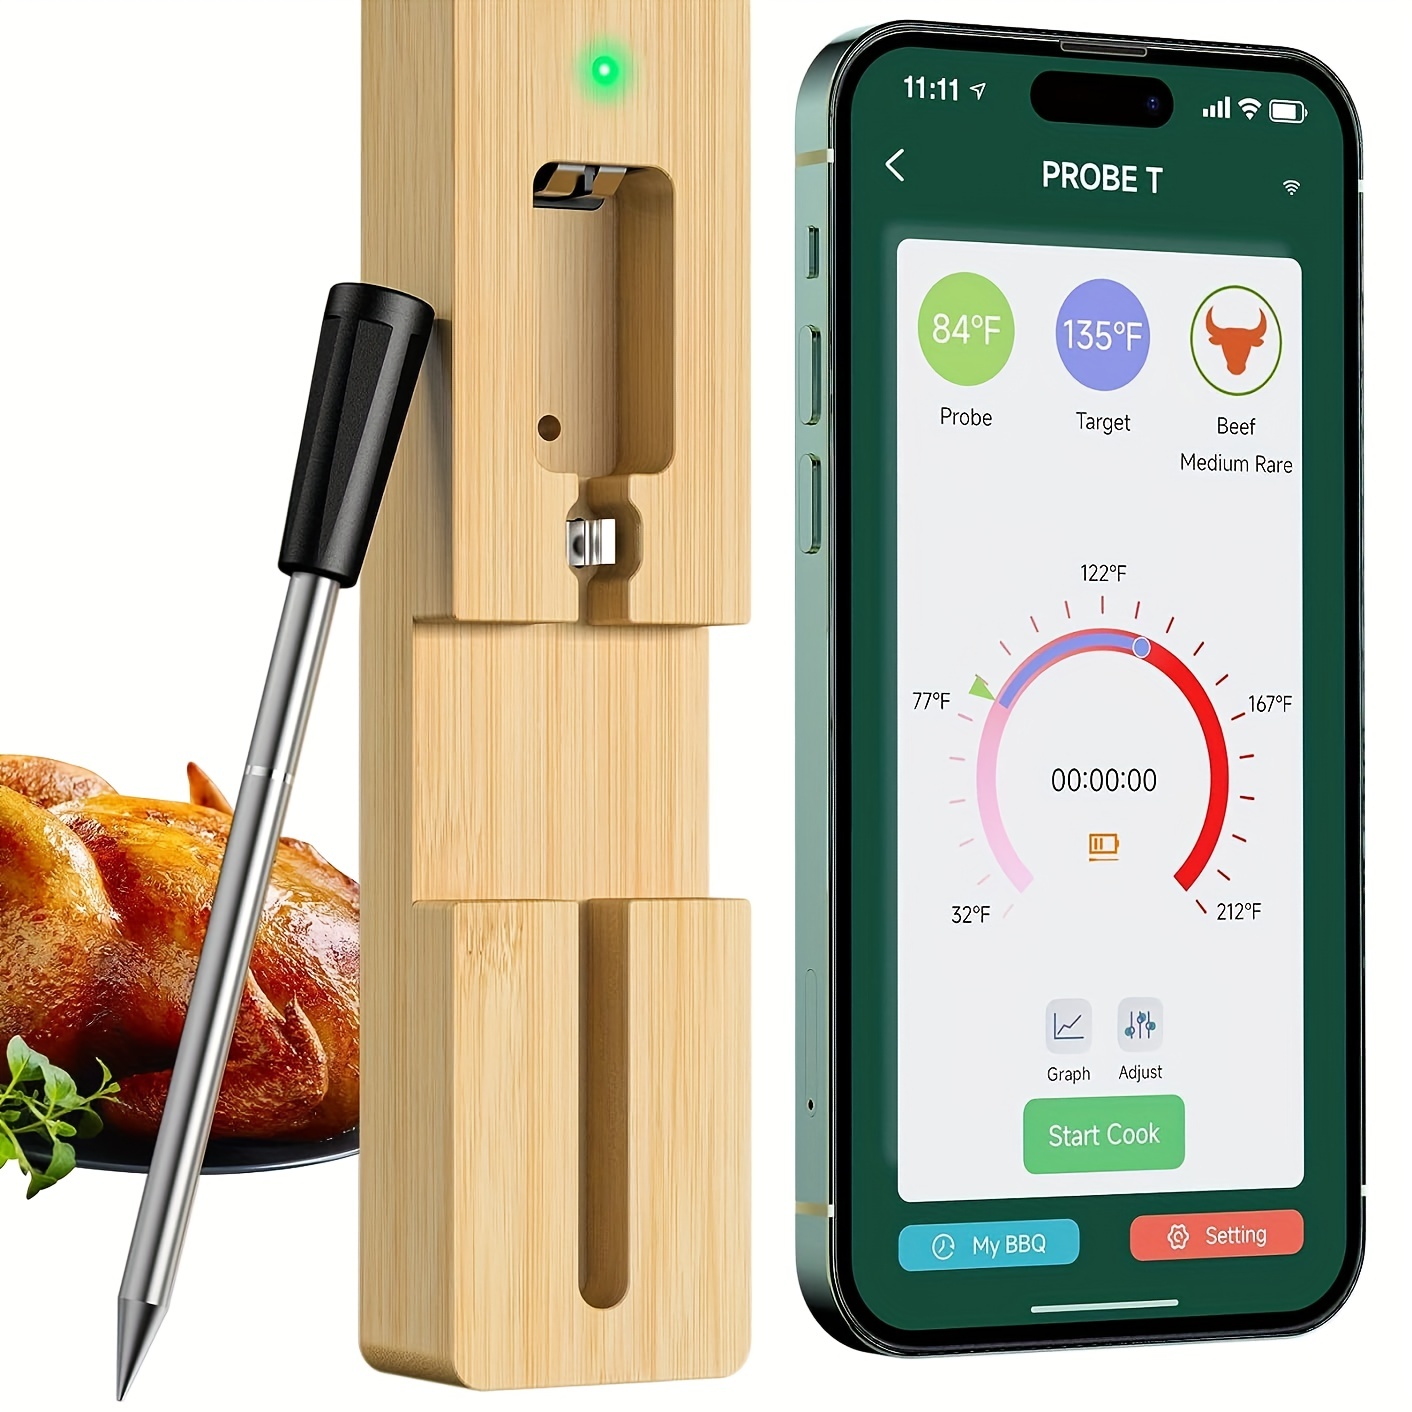 New MEATER+165ft BBQ Long Range Smart Wireless Meat Thermometer, Black